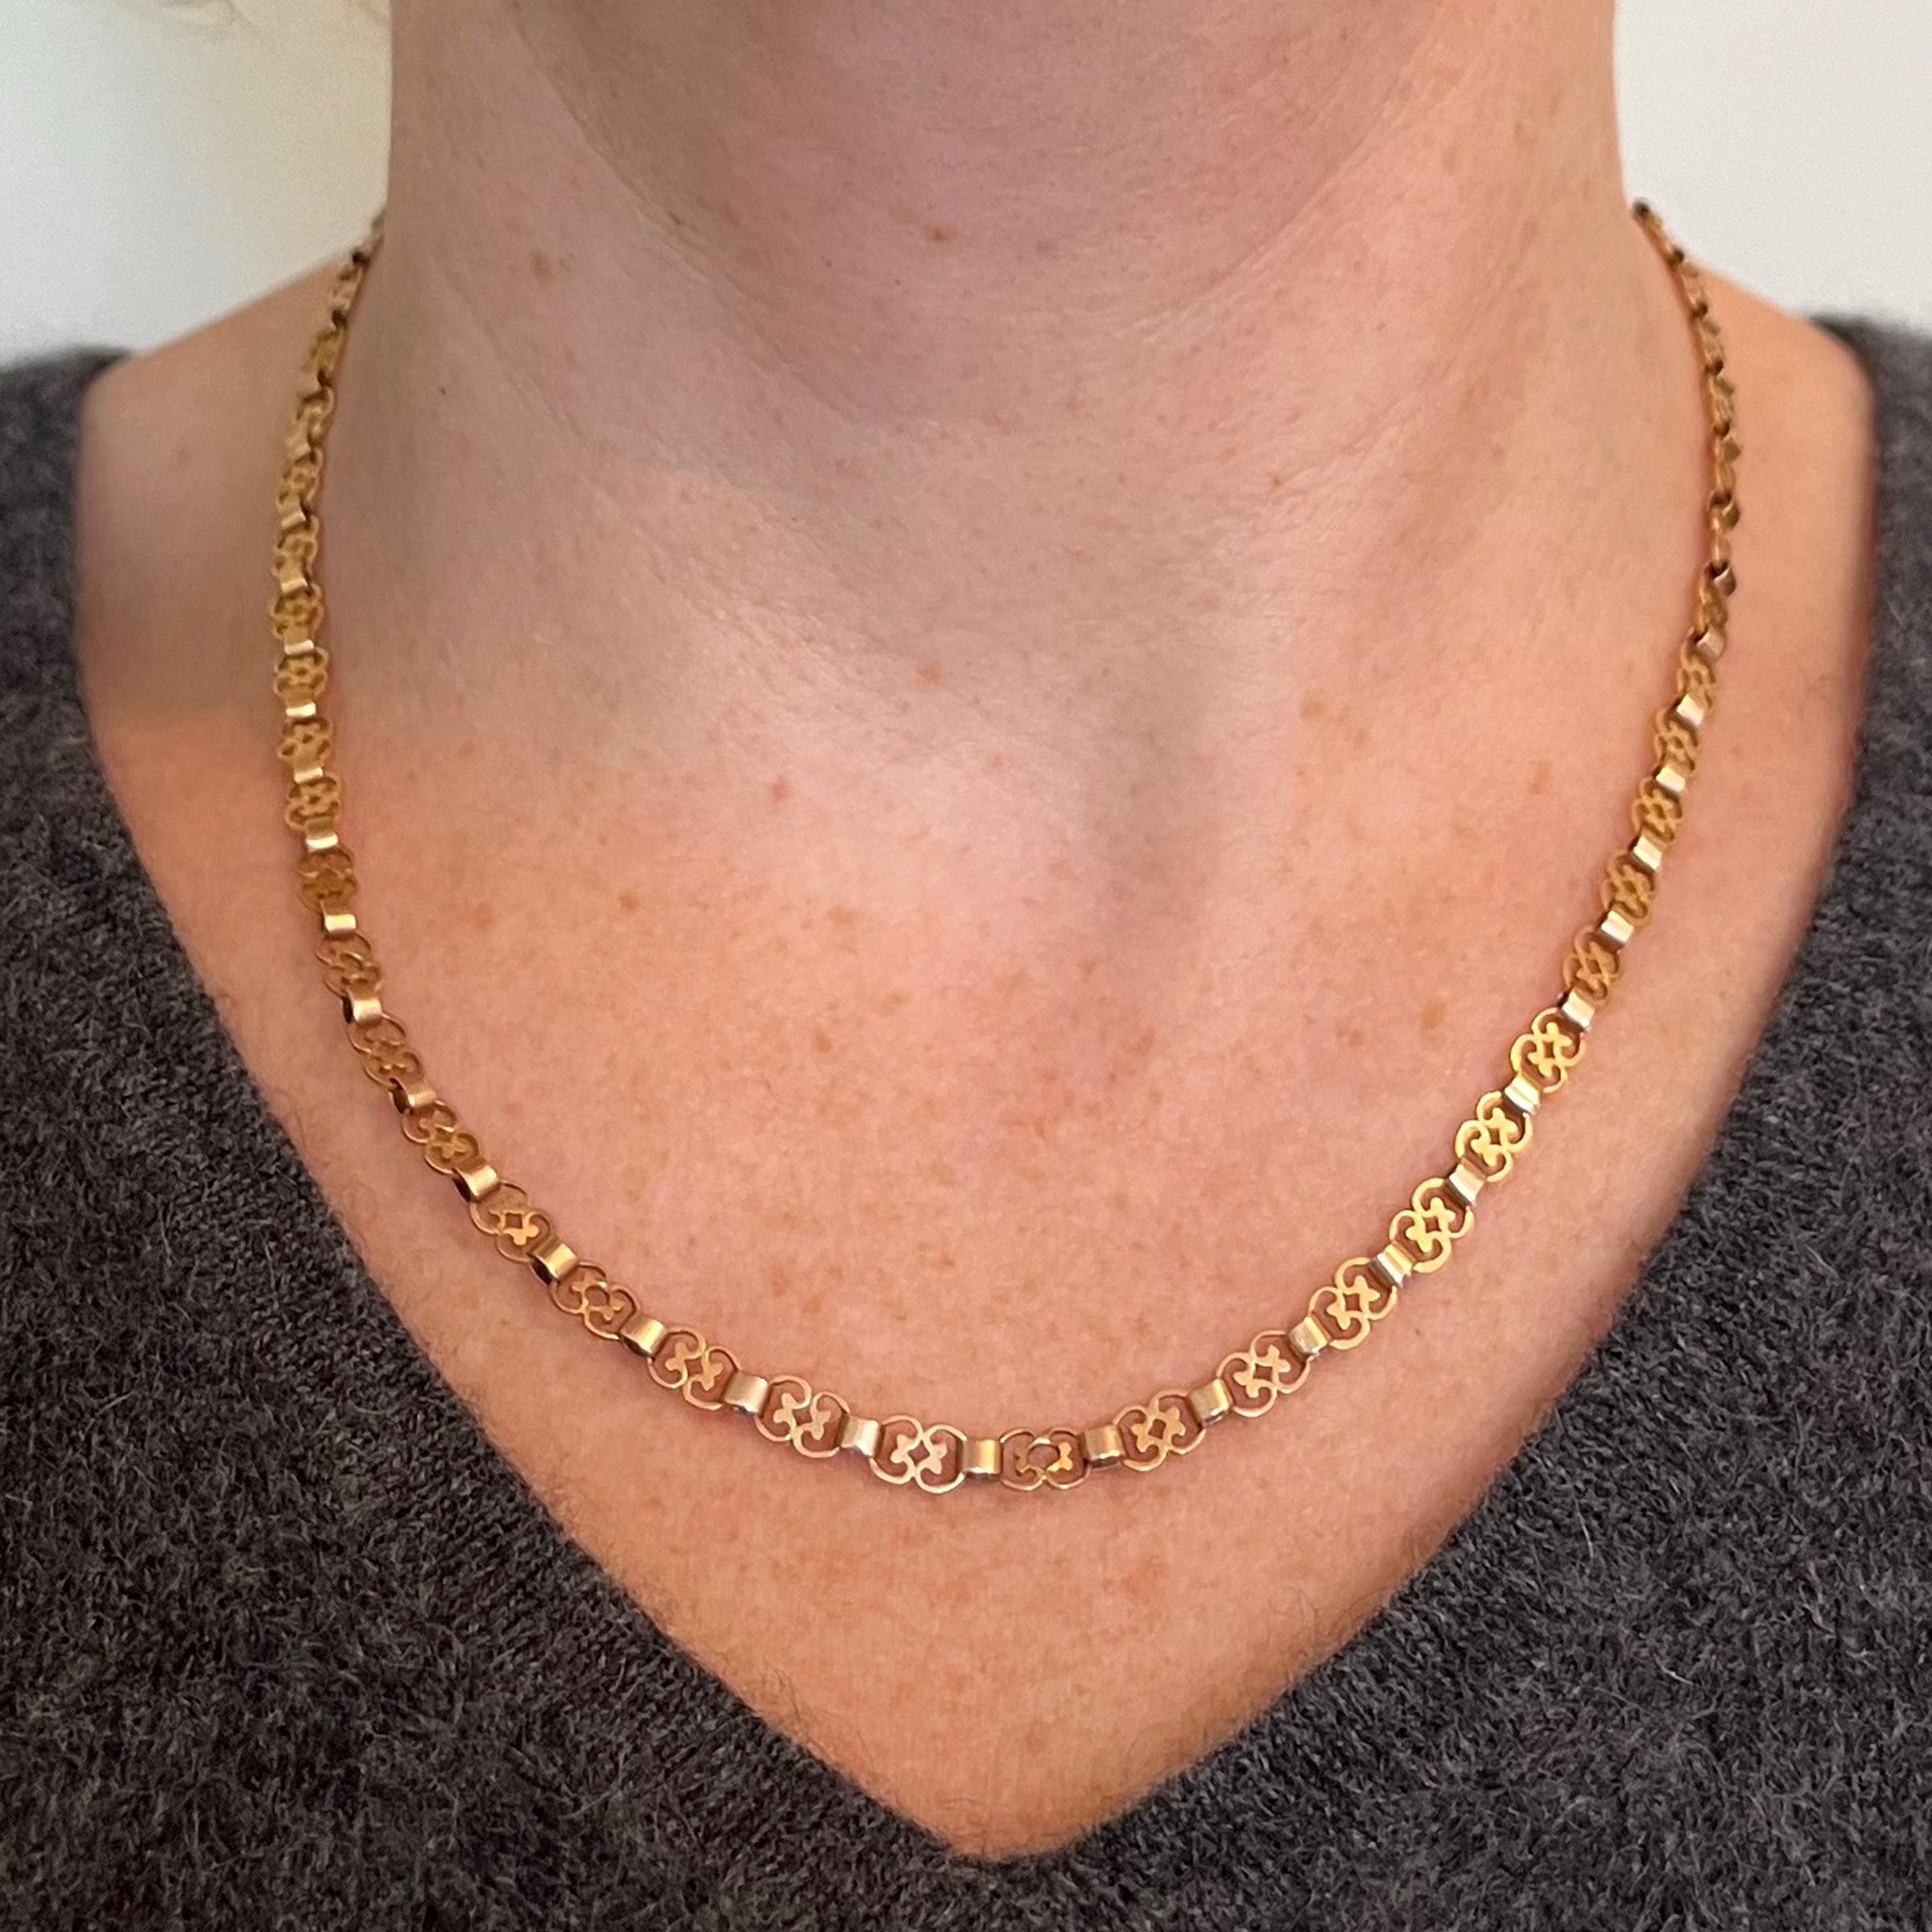 A French 18 karat (18K) rose gold chain necklace featuring fancy-shaped links connected by oval-shaped links to a box clasp. Stamped with a partial French eagle’s head for 18 karat gold and a partial unknown maker’s mark. 18” long.

Dimensions: 45 x